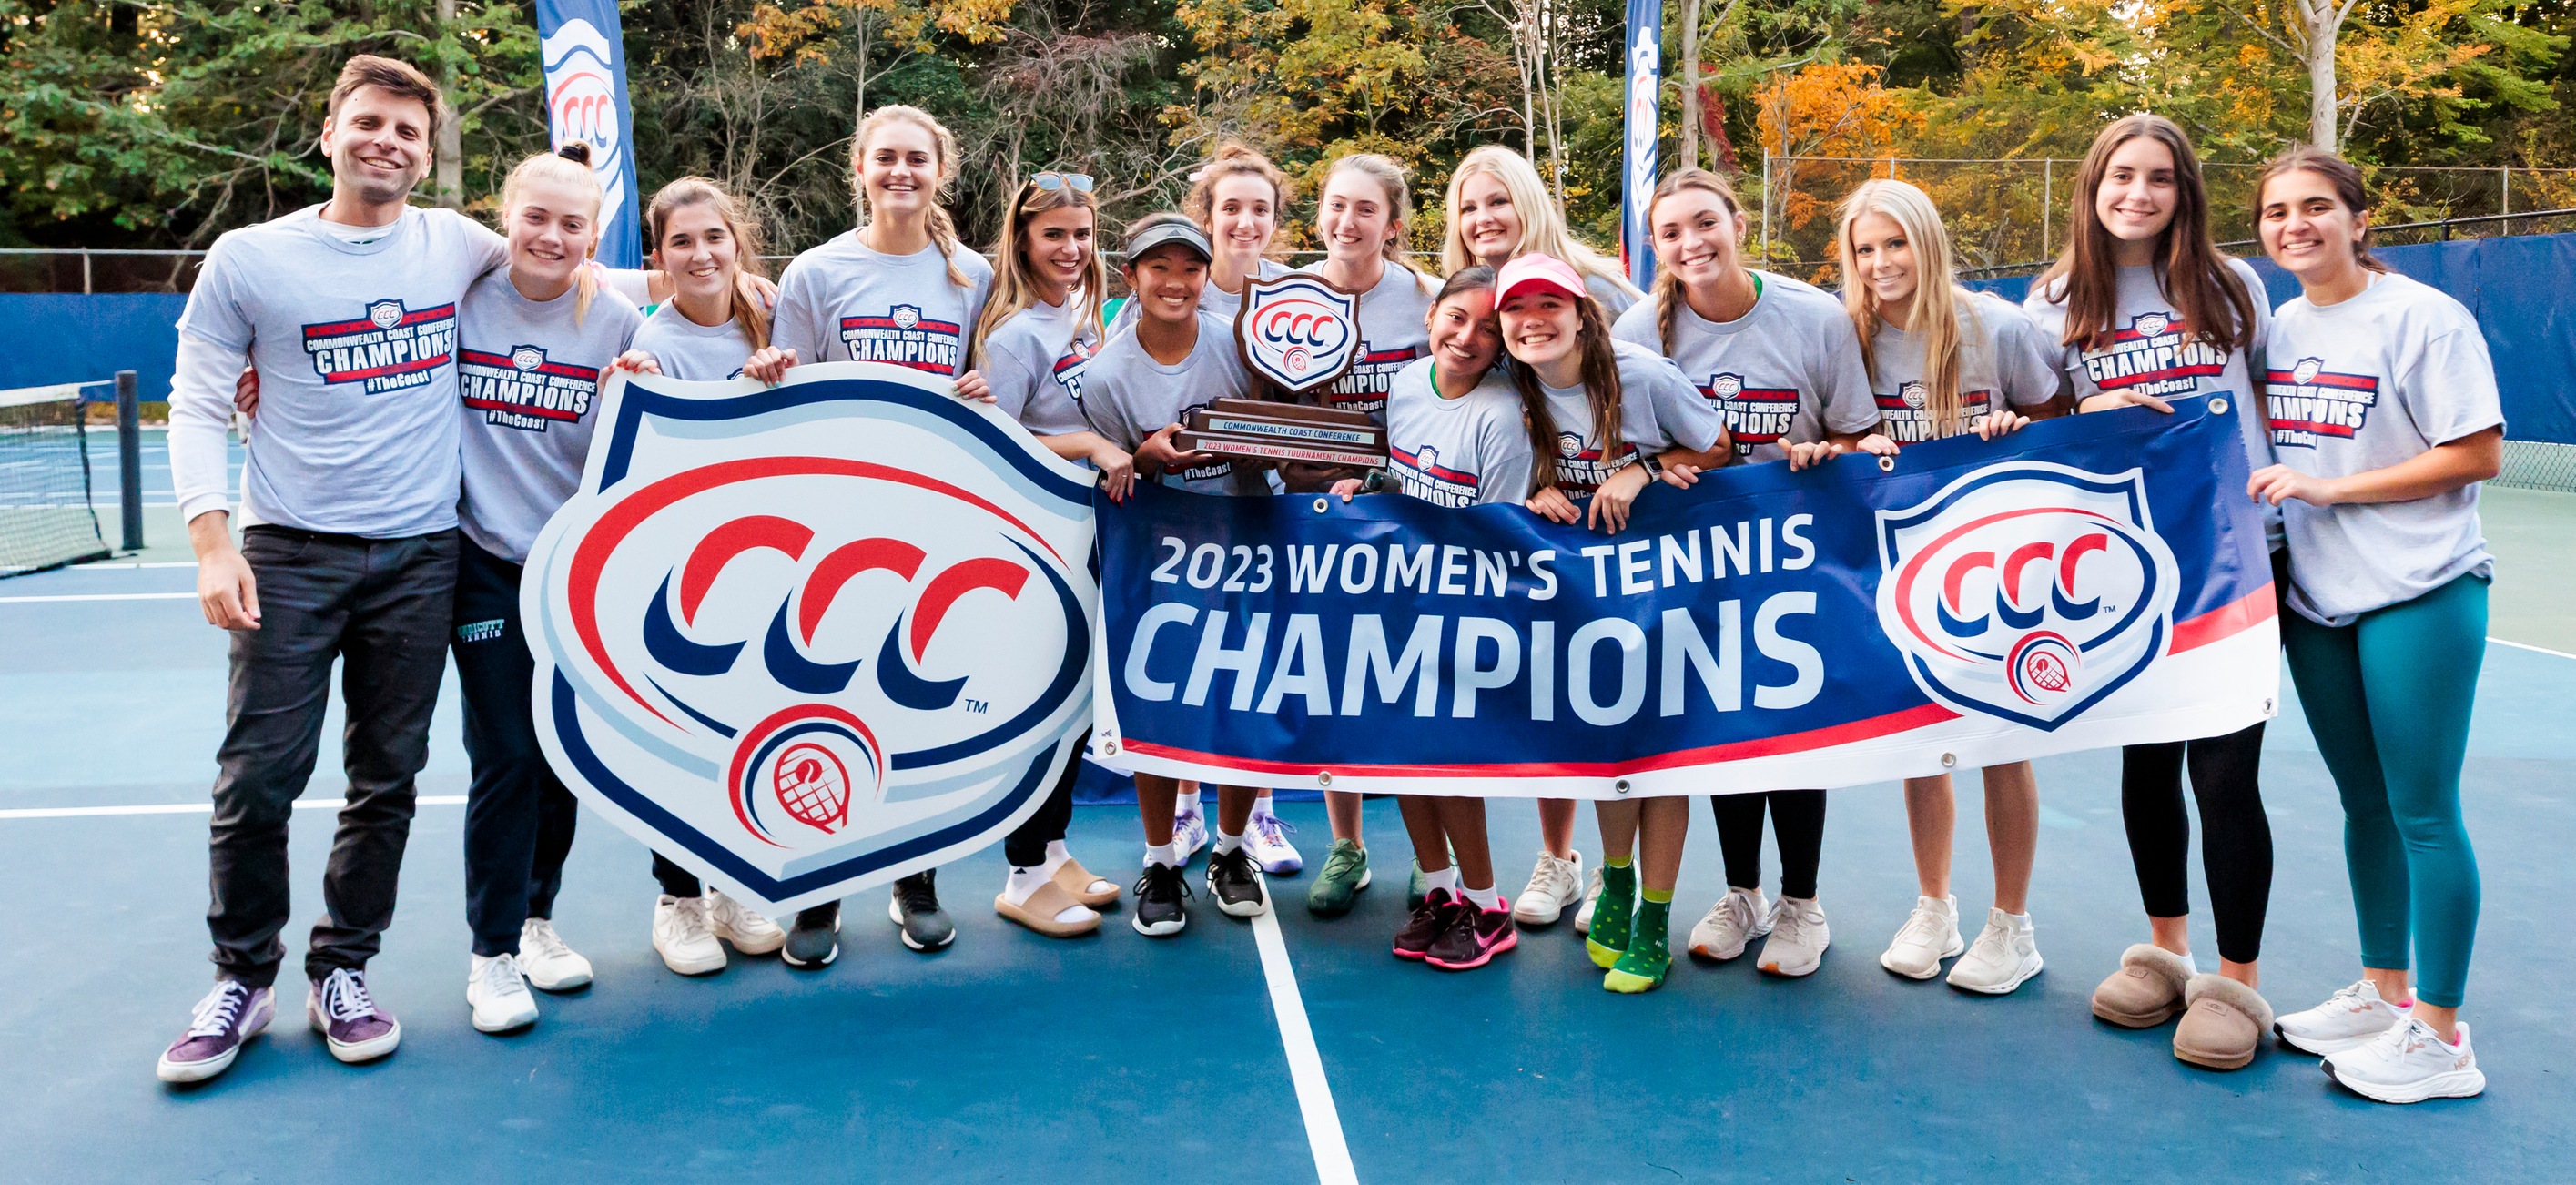 CCC CHAMPIONSHIP: Women’s Tennis Rallies Past Nichols To Complete Four-Peat